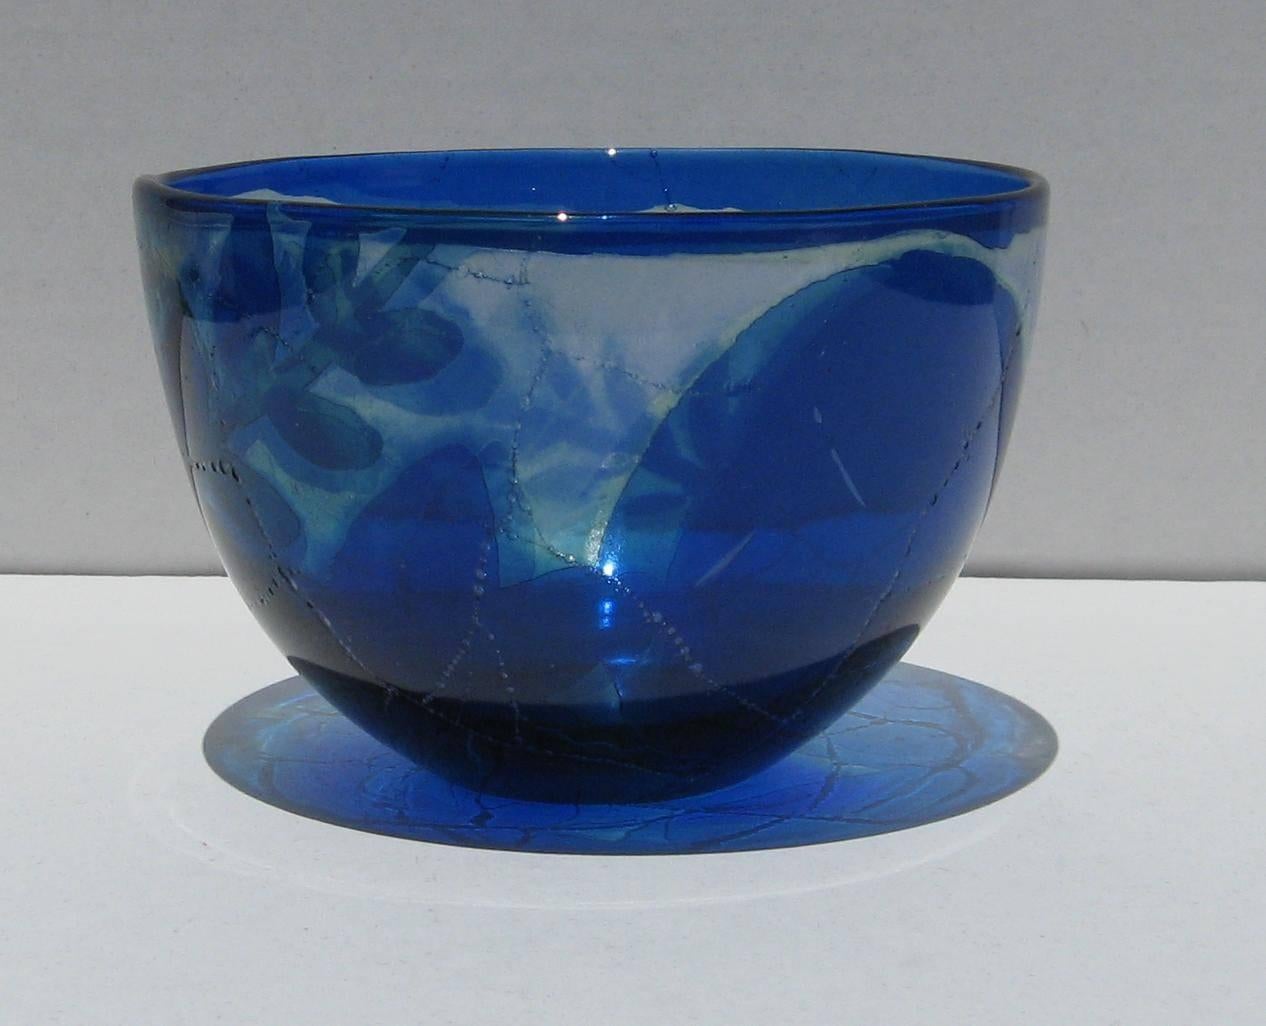 This modern art glass bowl is internally decorated with botanical designs.
It's in mint condition and marked on the bottom Kosta, Warff & 57368.
It is certainly made by the hands of an excellent craftsman.
It measures 3